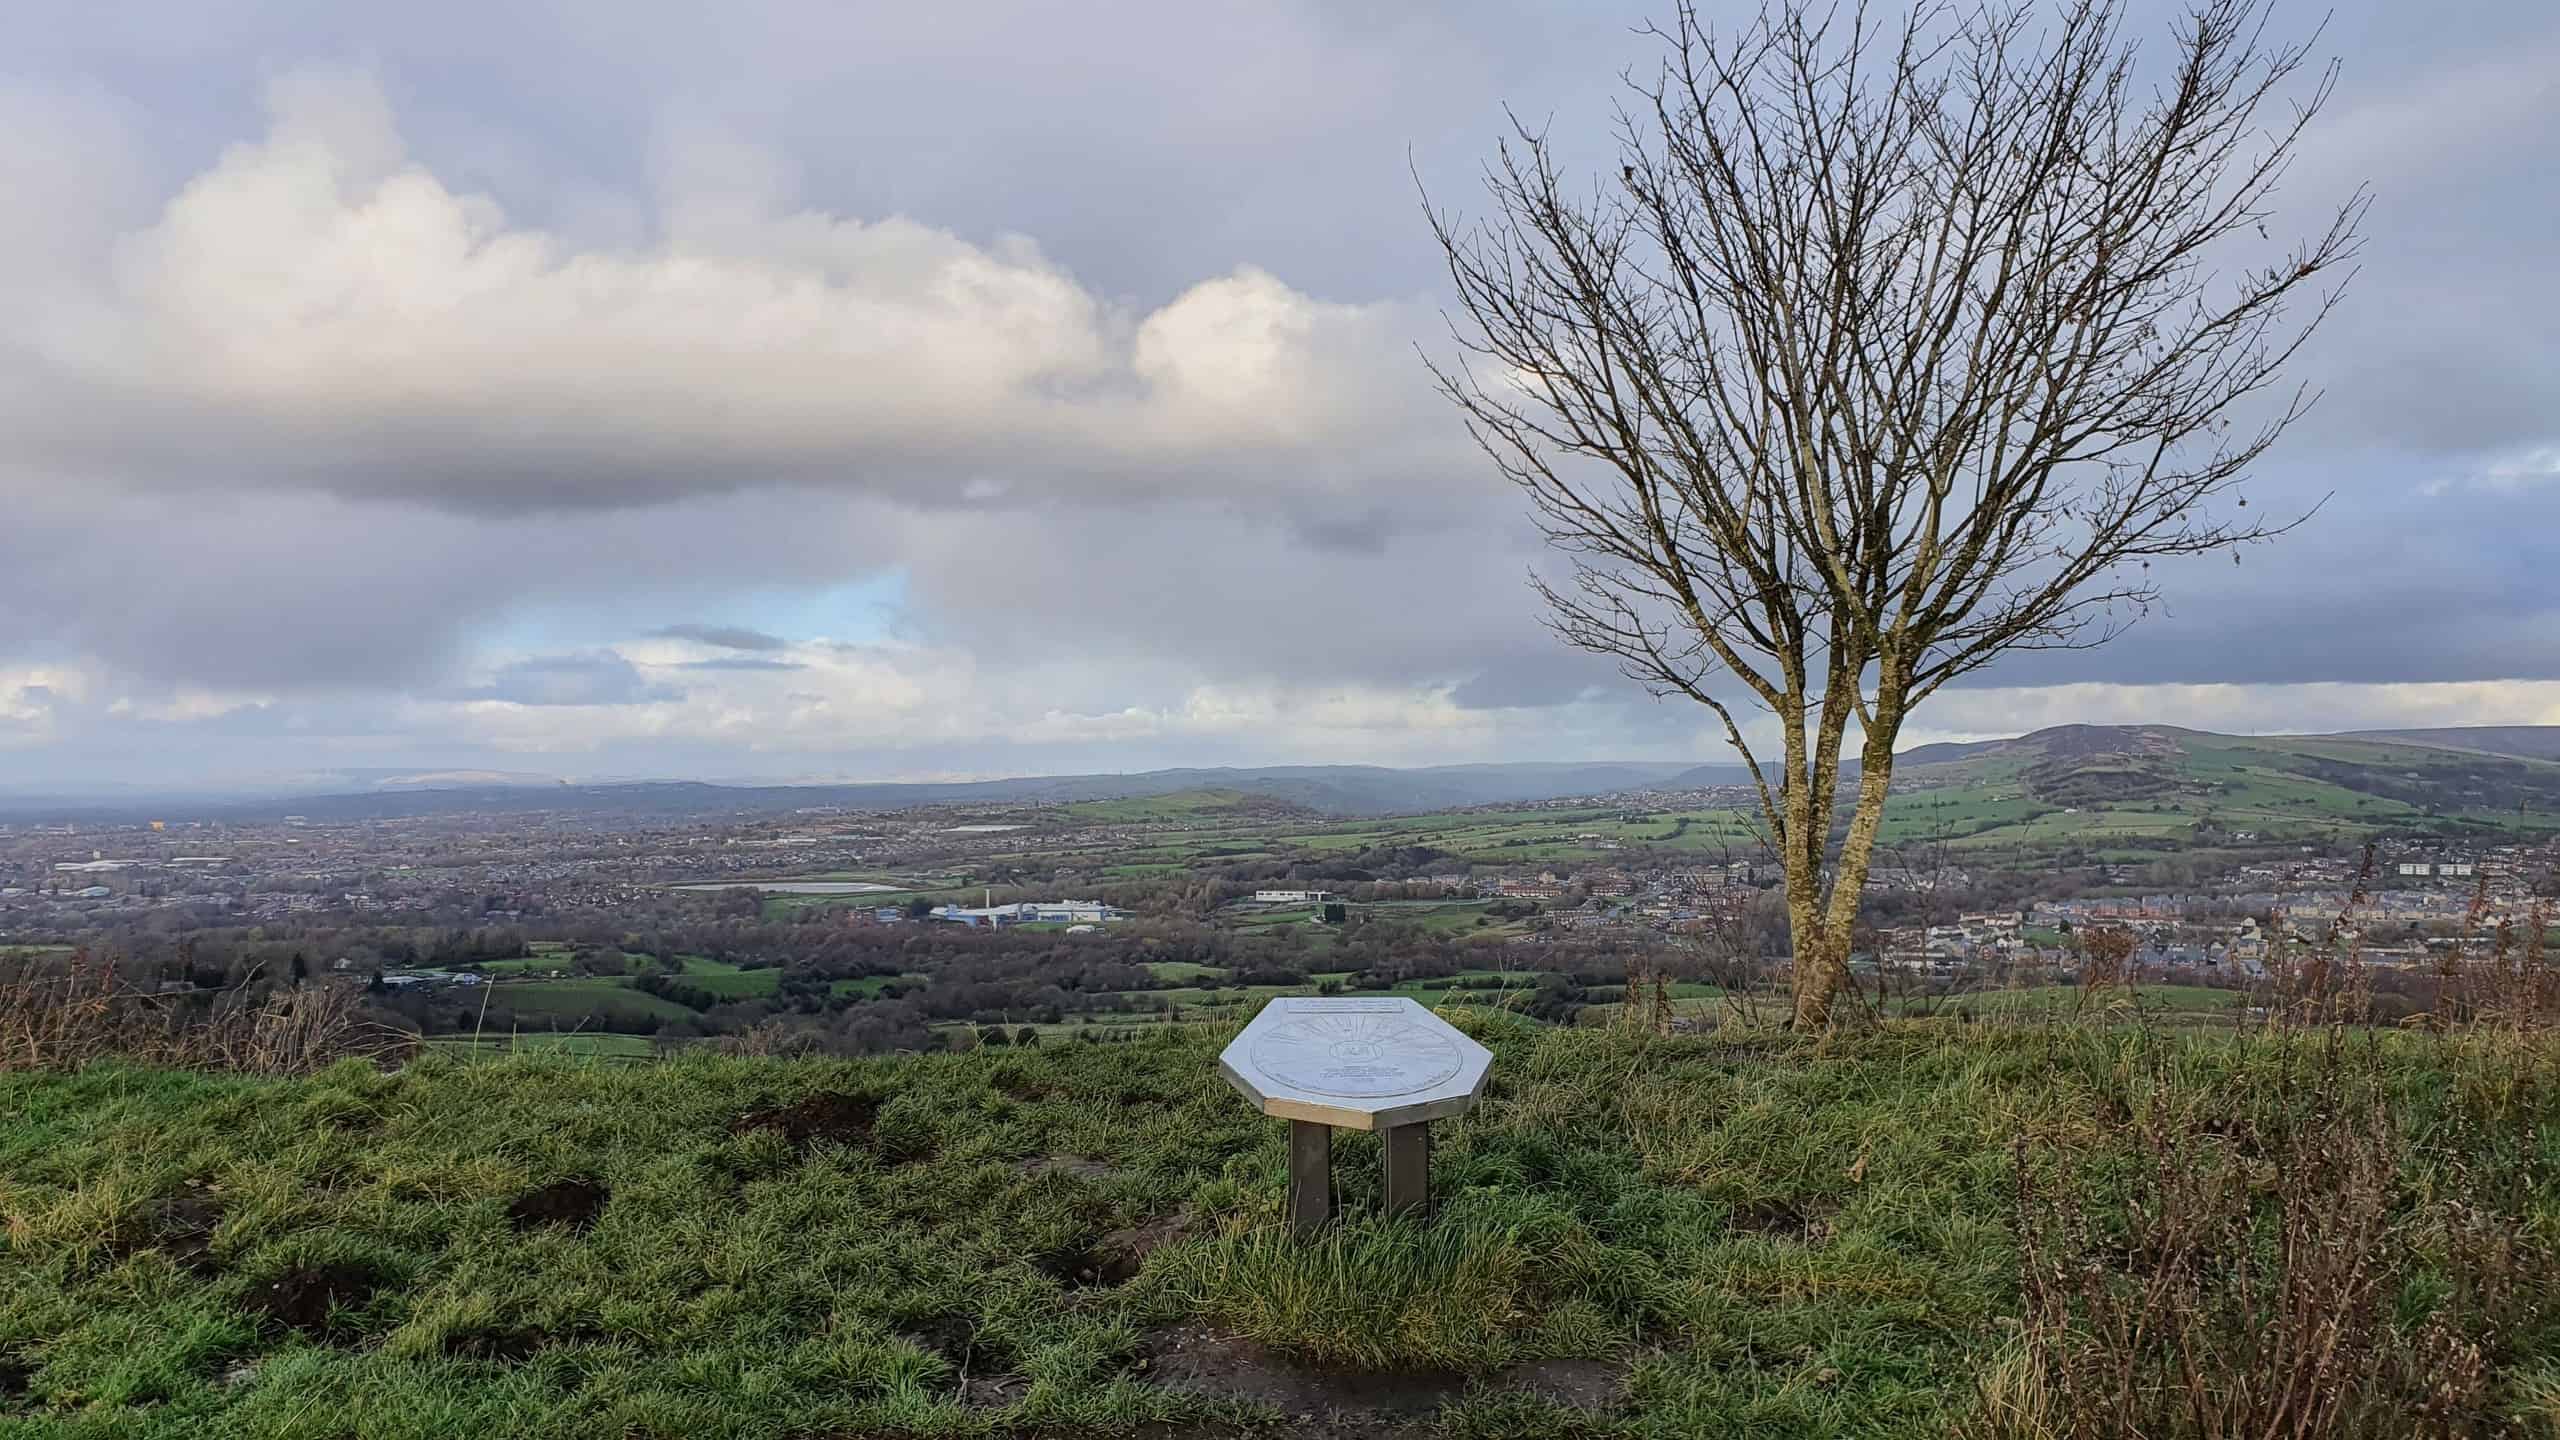 Views from Werneth Low Country Park